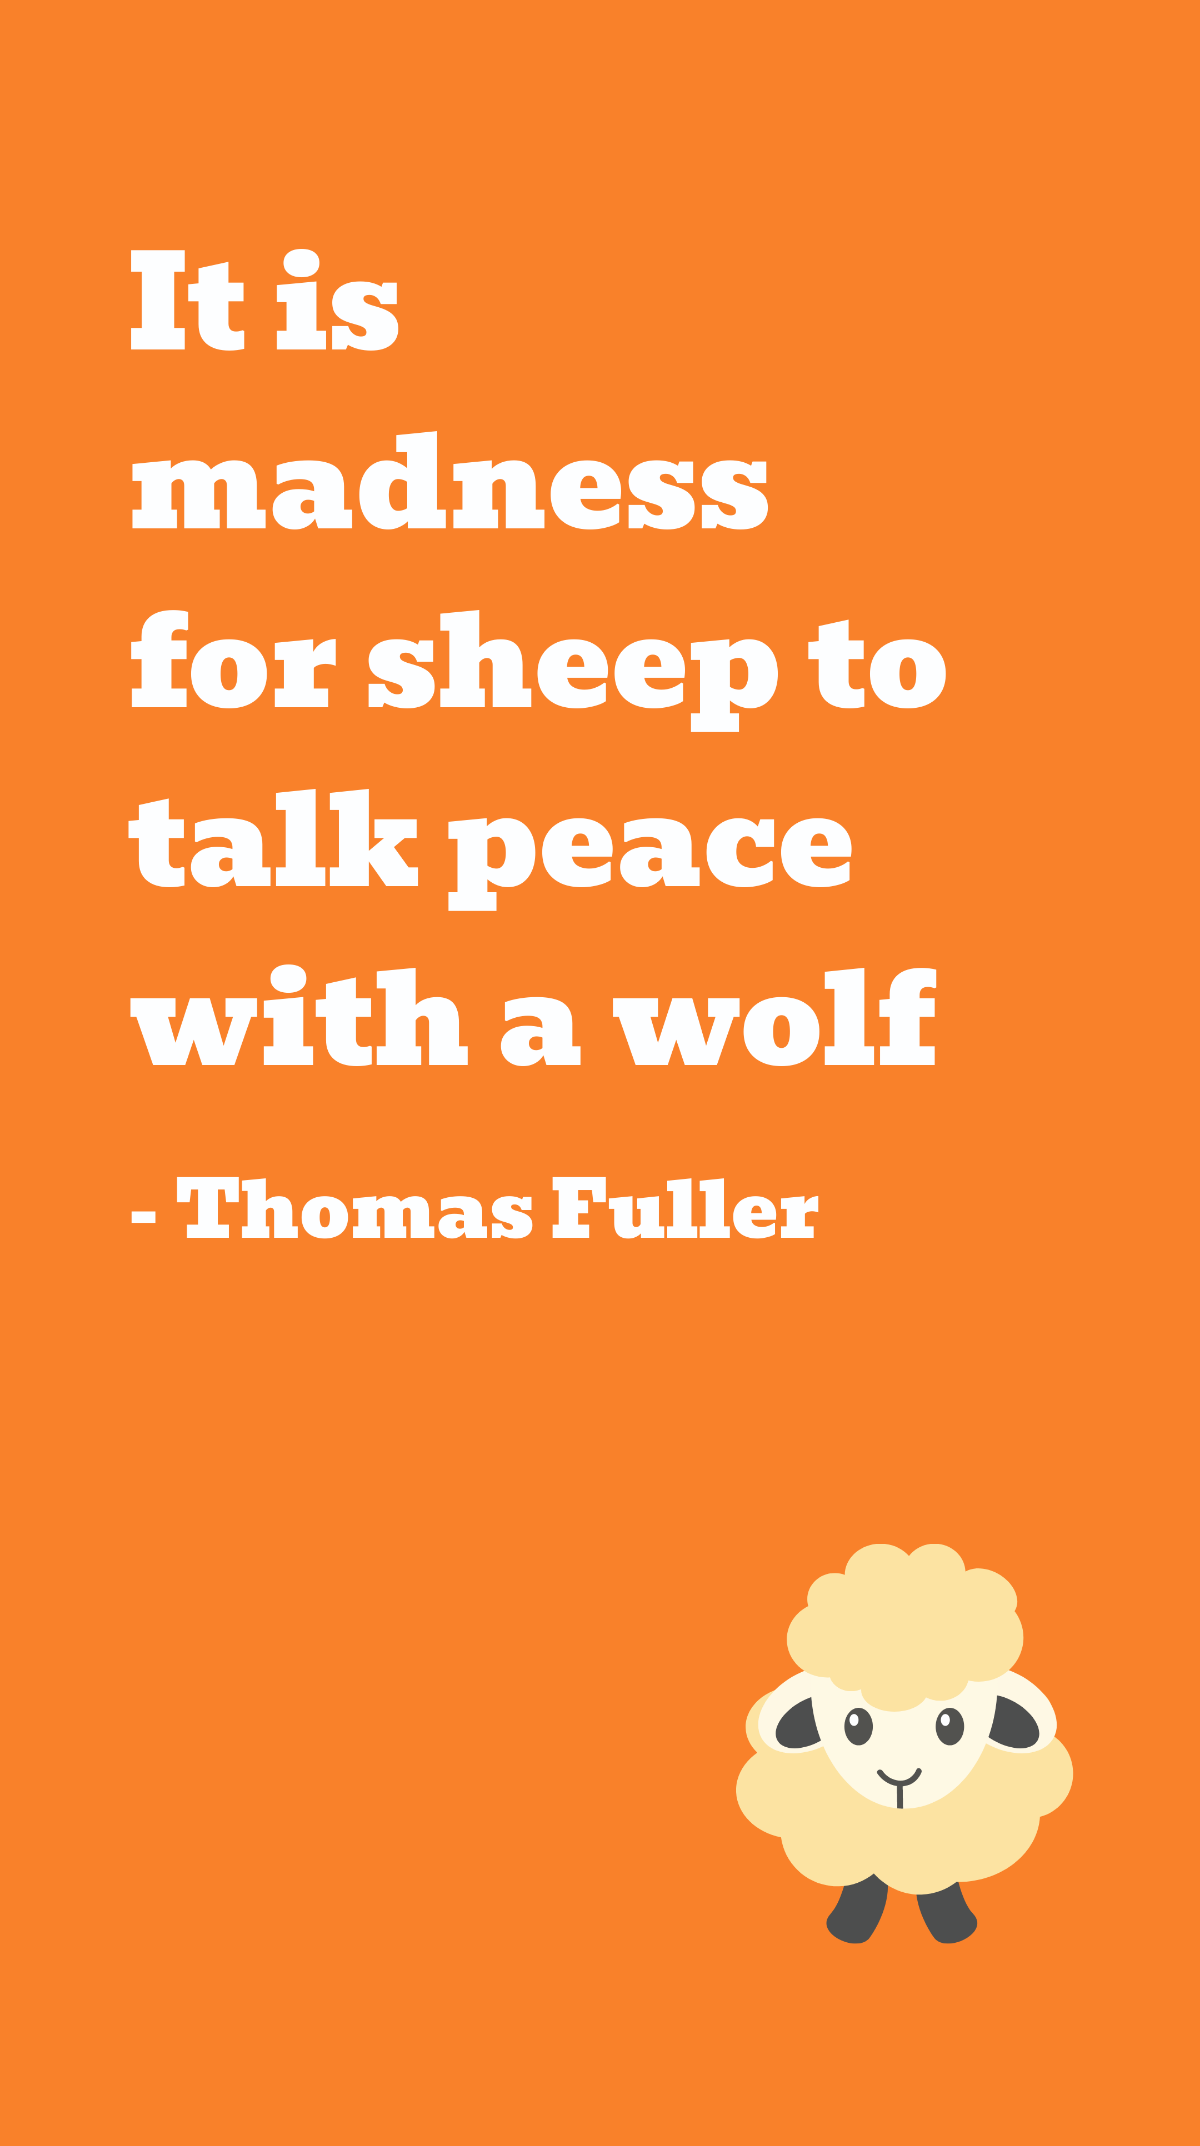 Thomas Fuller - It is madness for sheep to talk peace with a wolf